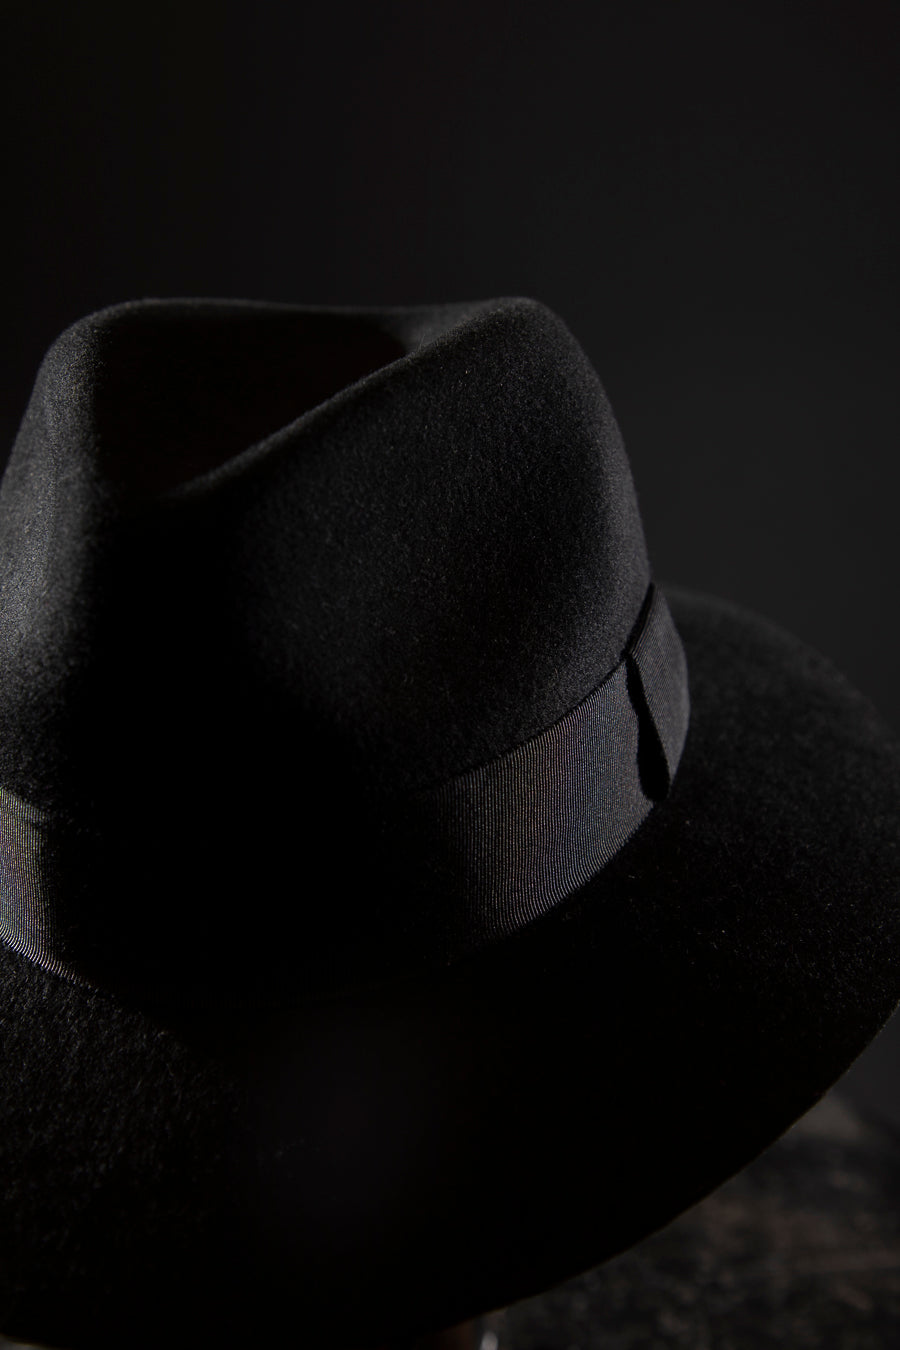 Wool Felt Fedora - Deluxe, high quality hats for men and women. Our collection of hats including wool felt top hats, fedoras, bowlers, caps, fedoras, trilbys, cloches and more are a wonderful addition to a 1920s Gangster or Gatsby costume, or the perfect fashion accessory. Shop online, or visit our Mornington hat store to see all that we have to offer.